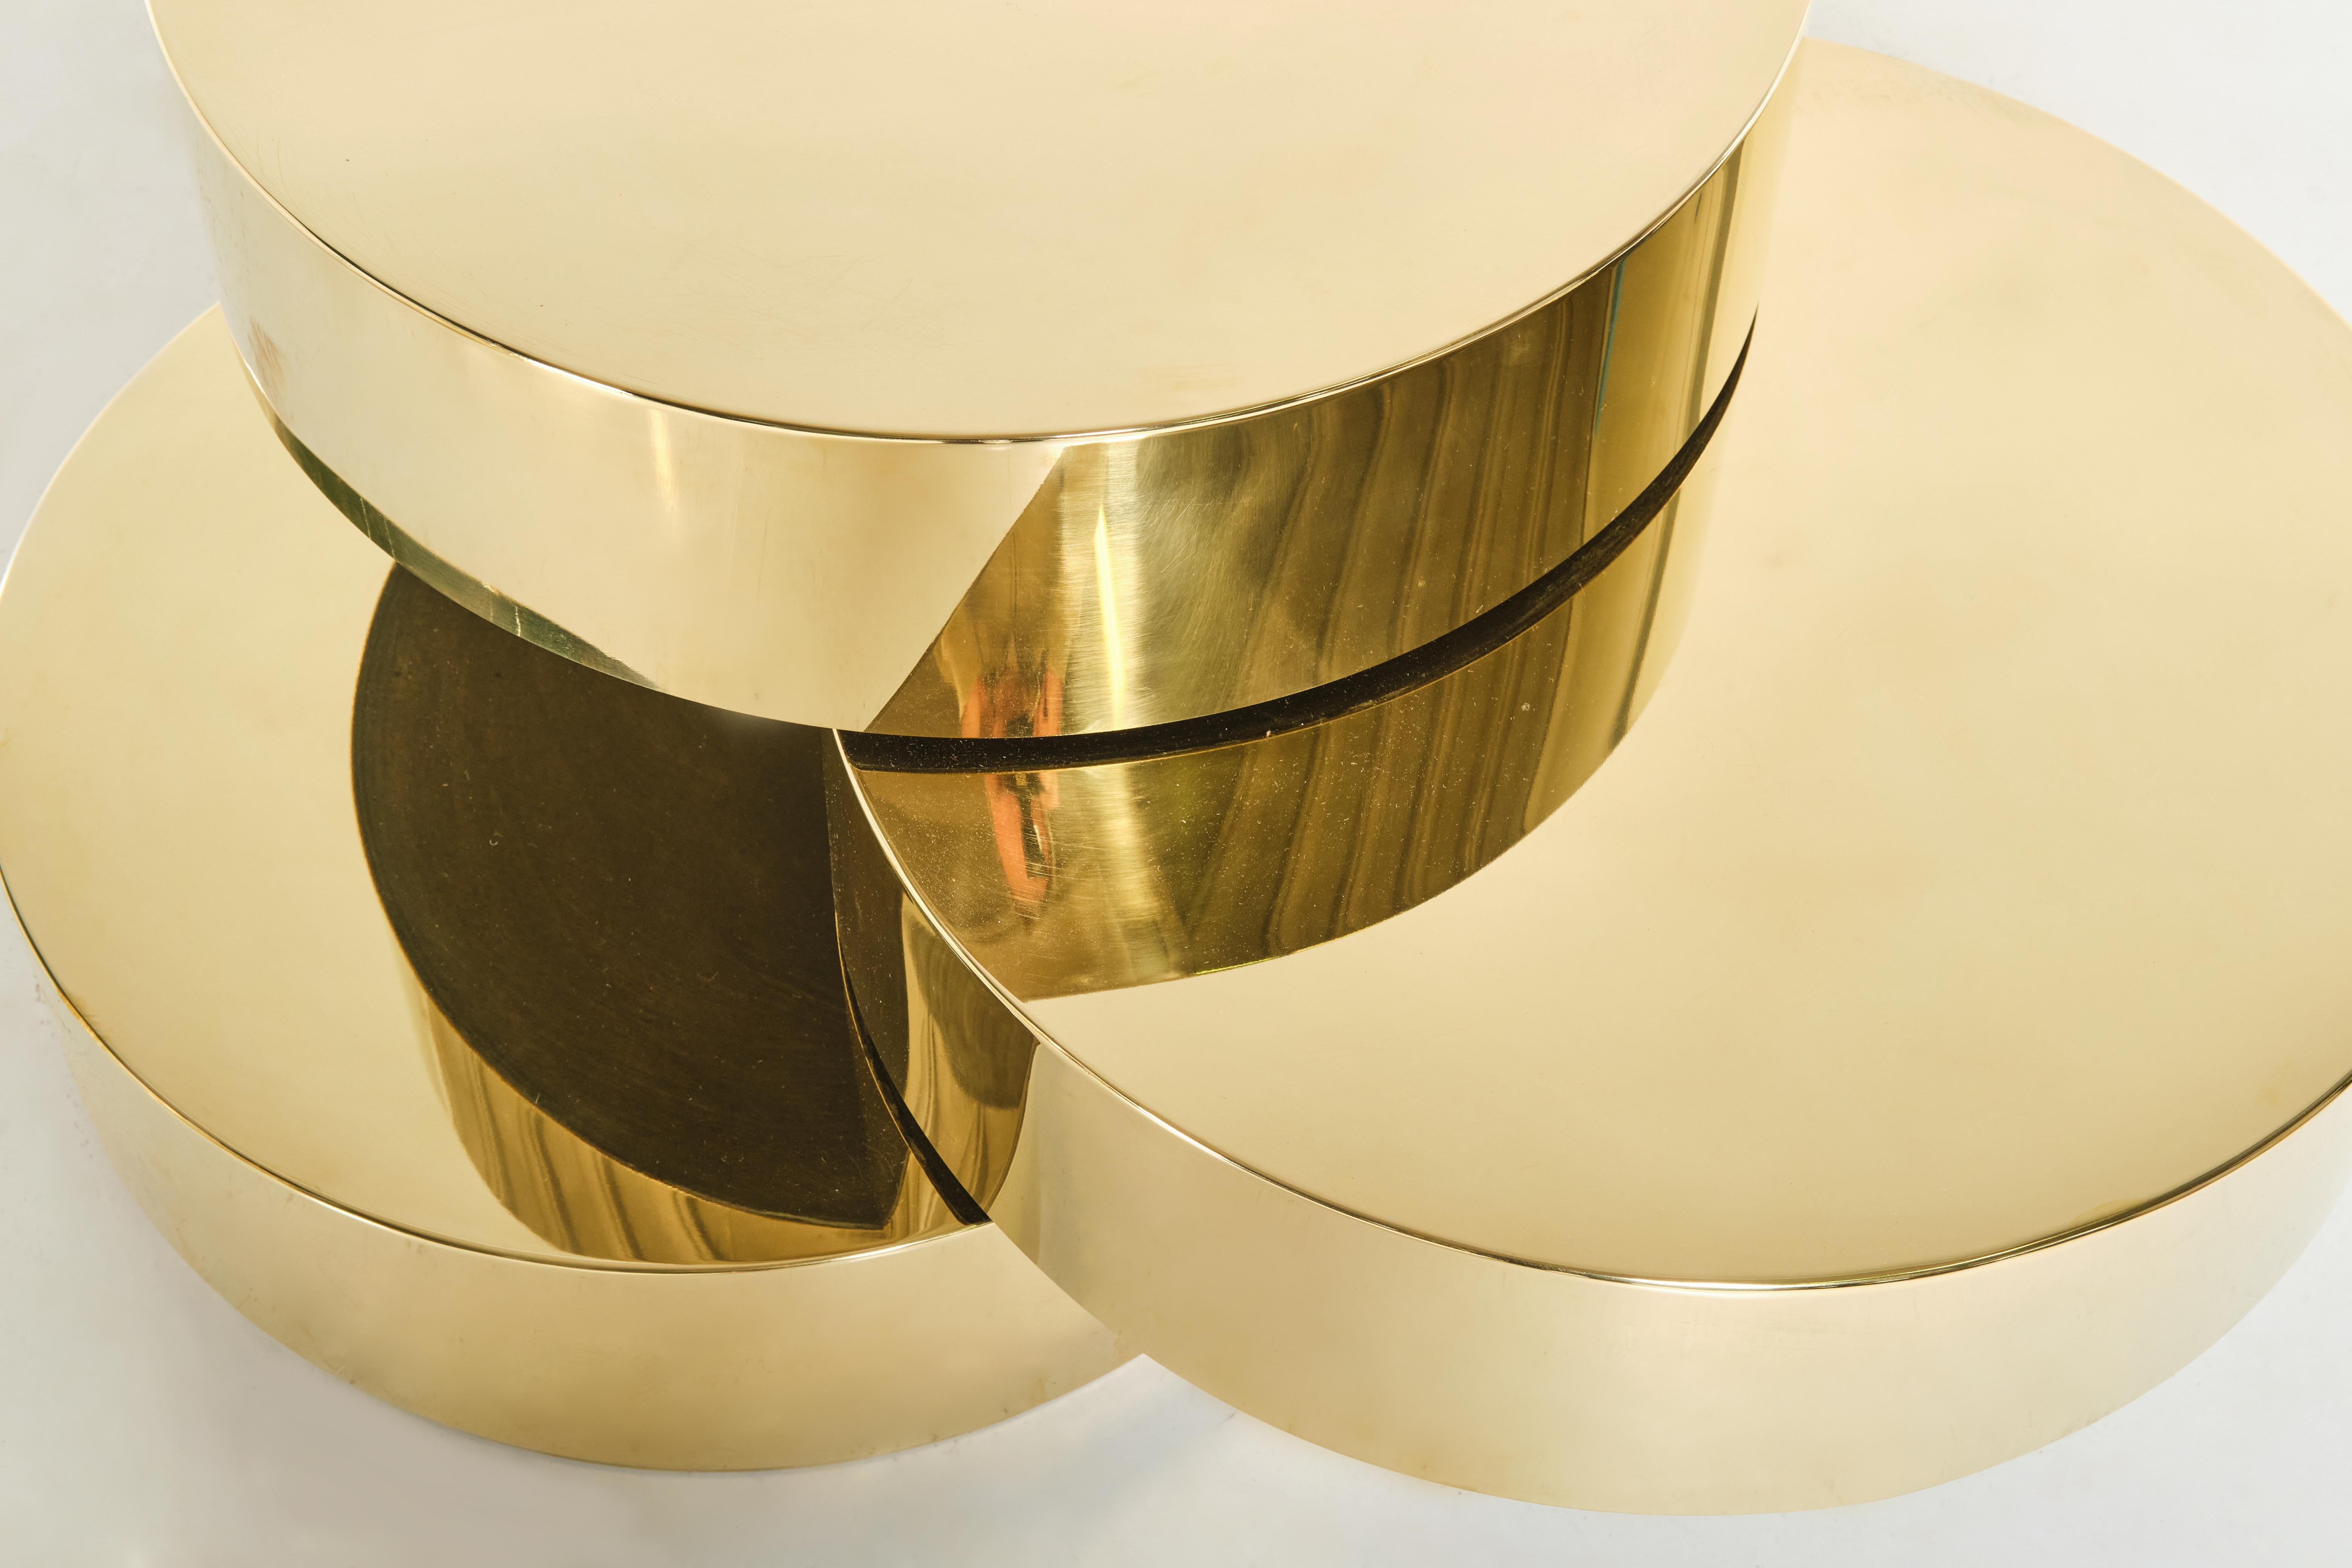 Two Stunning Brass Low Tables with Mobile Tops, Italian Design, 1980 Circa For Sale 2